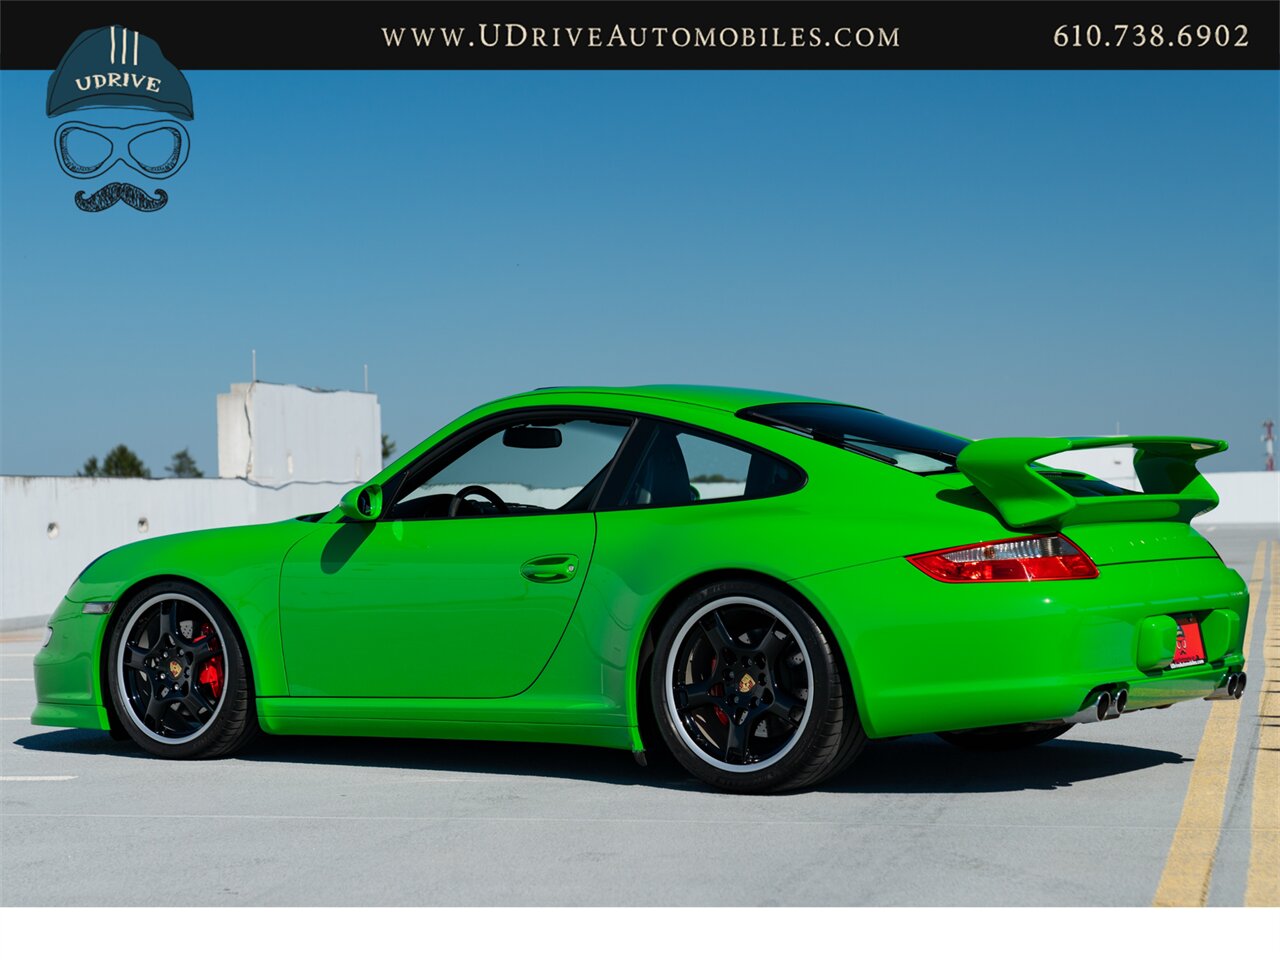 2006 Porsche 911 Carrera 4S  997 PTS Signal Green 6Sp Sport Sts Spt Chrono Spt Exhst - Photo 26 - West Chester, PA 19382